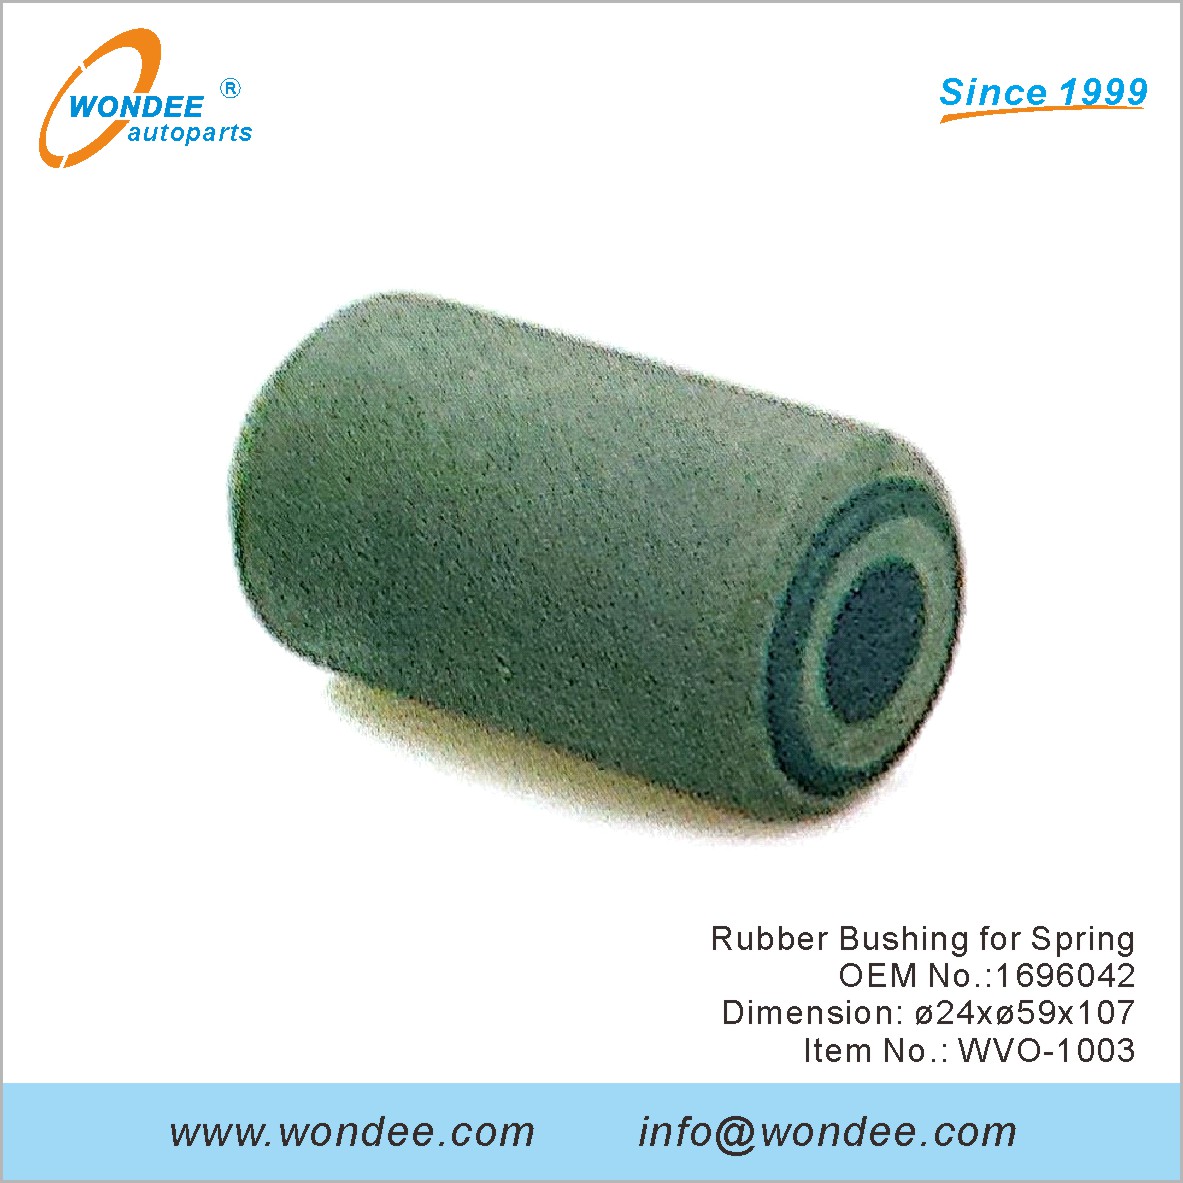 Rubber Bushing for Spring OEM 1696042 for Volvo from WONDEE